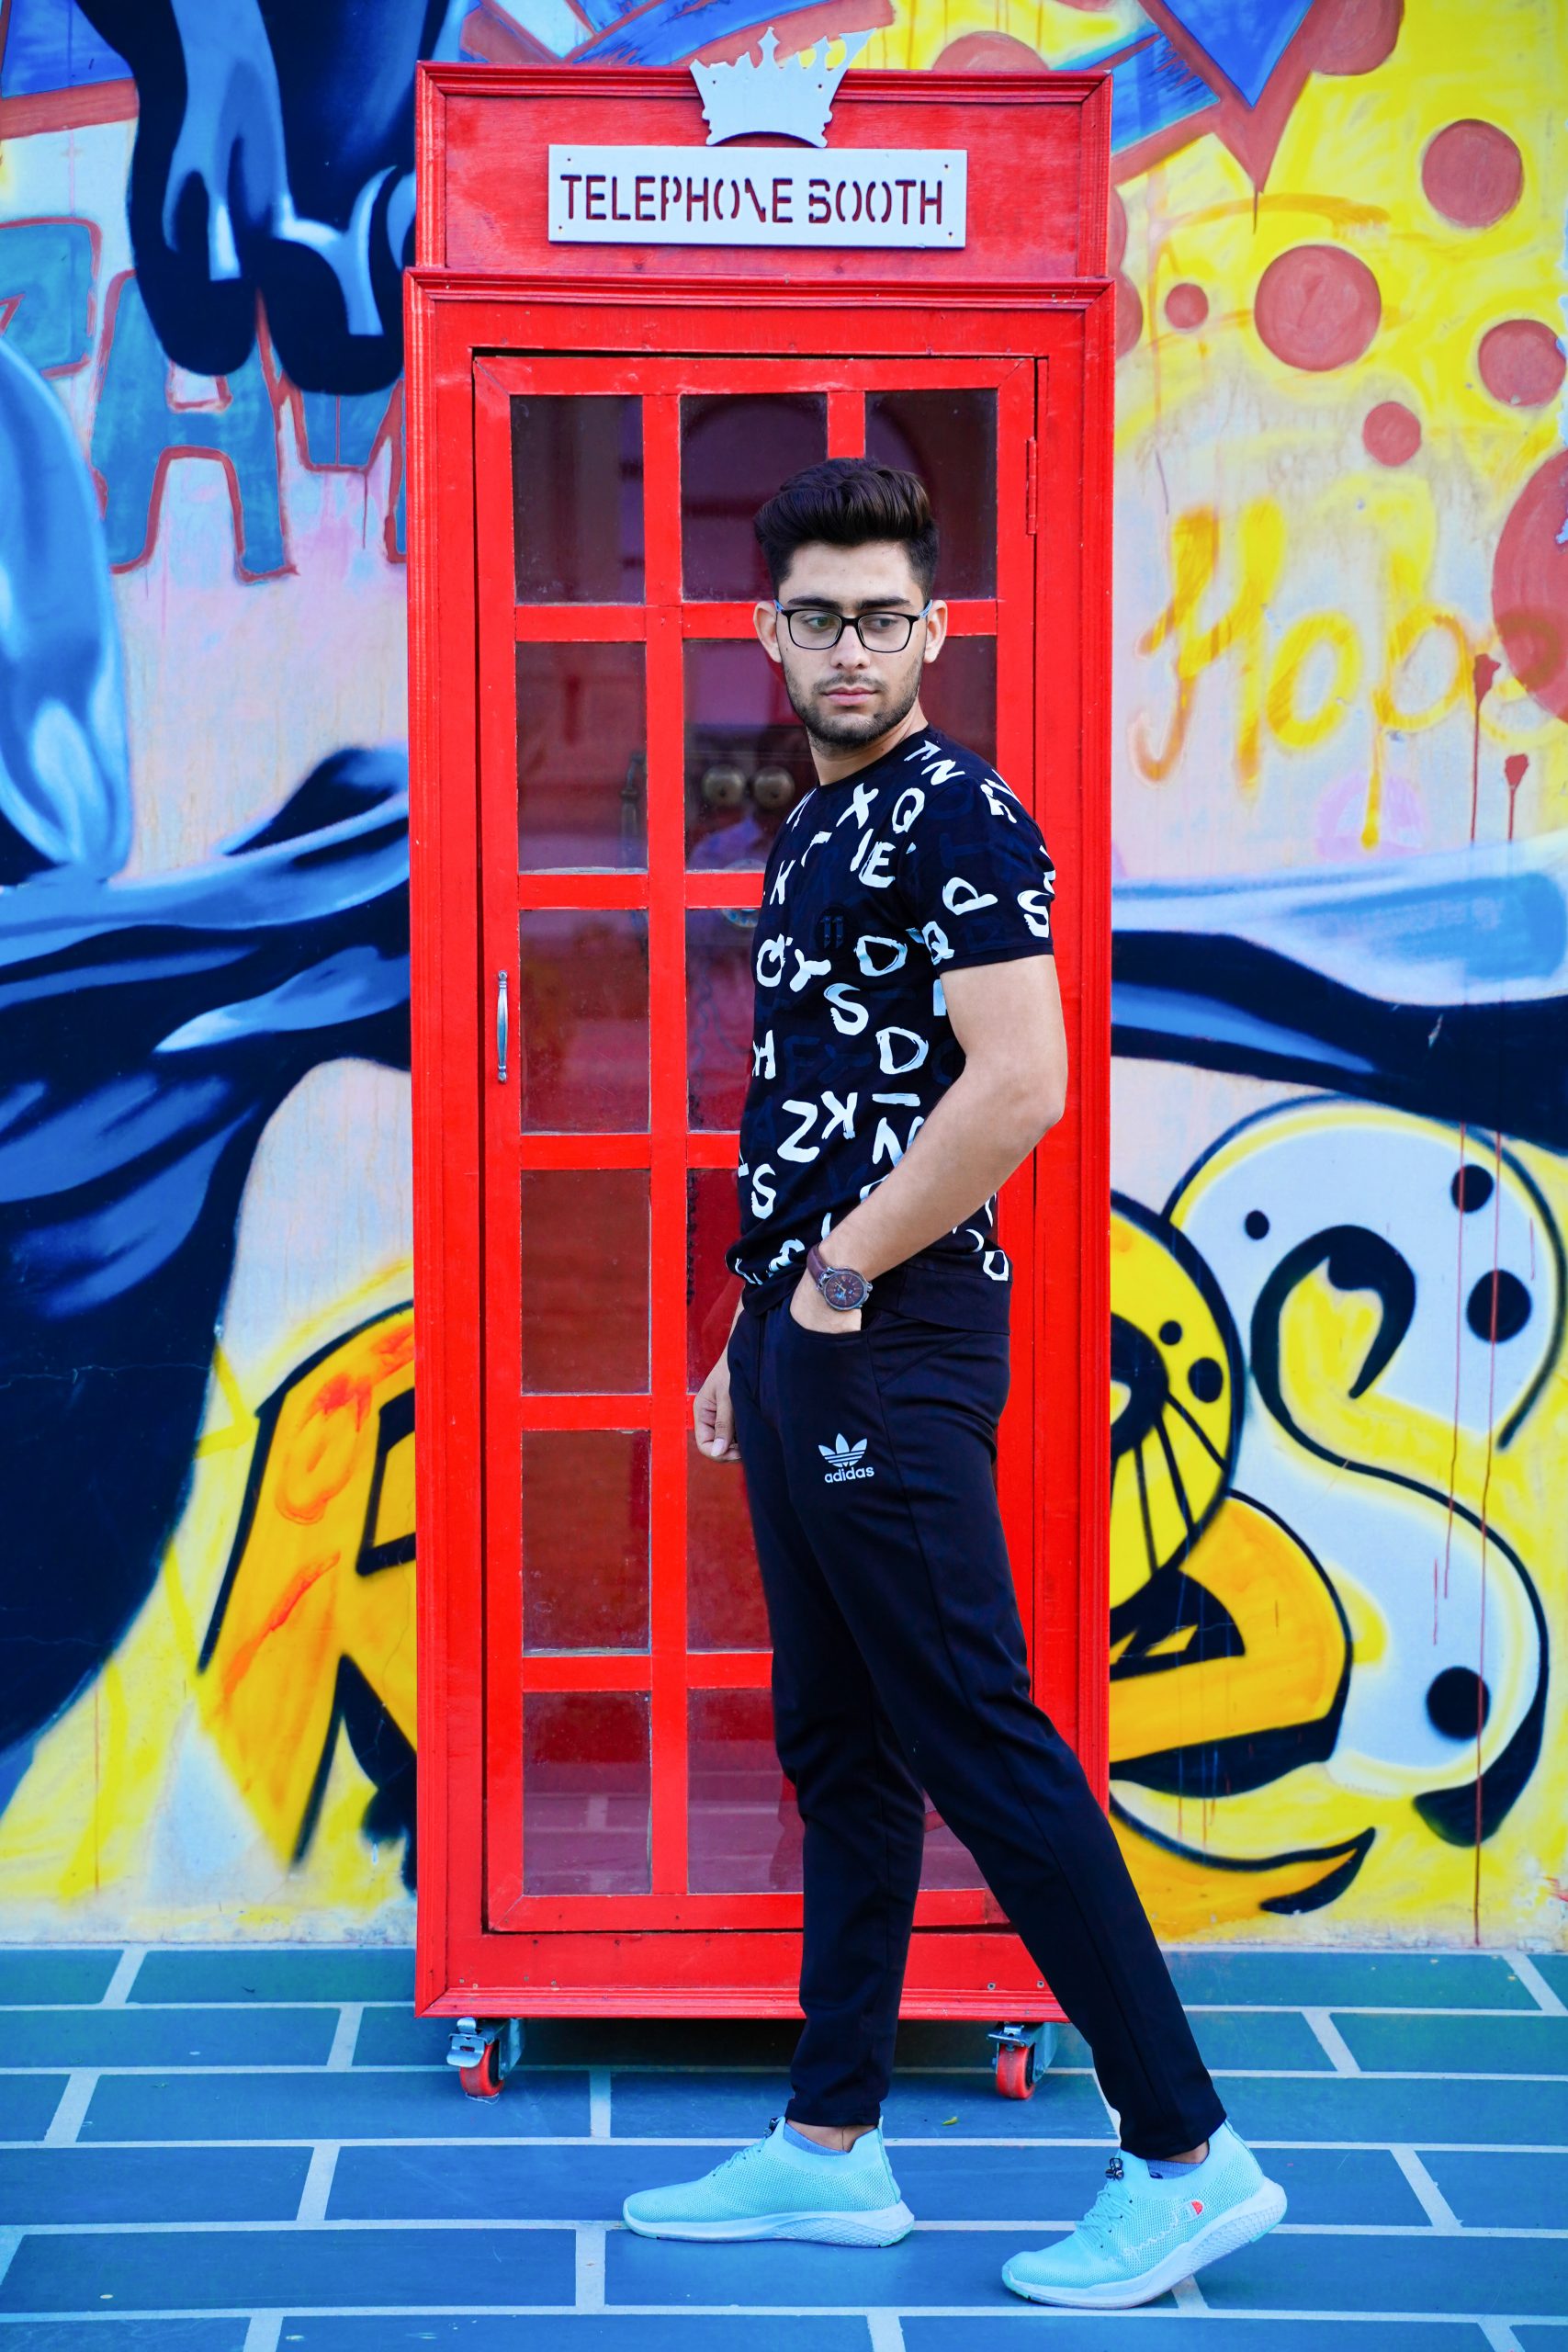 Boy posing in front of telephone booth